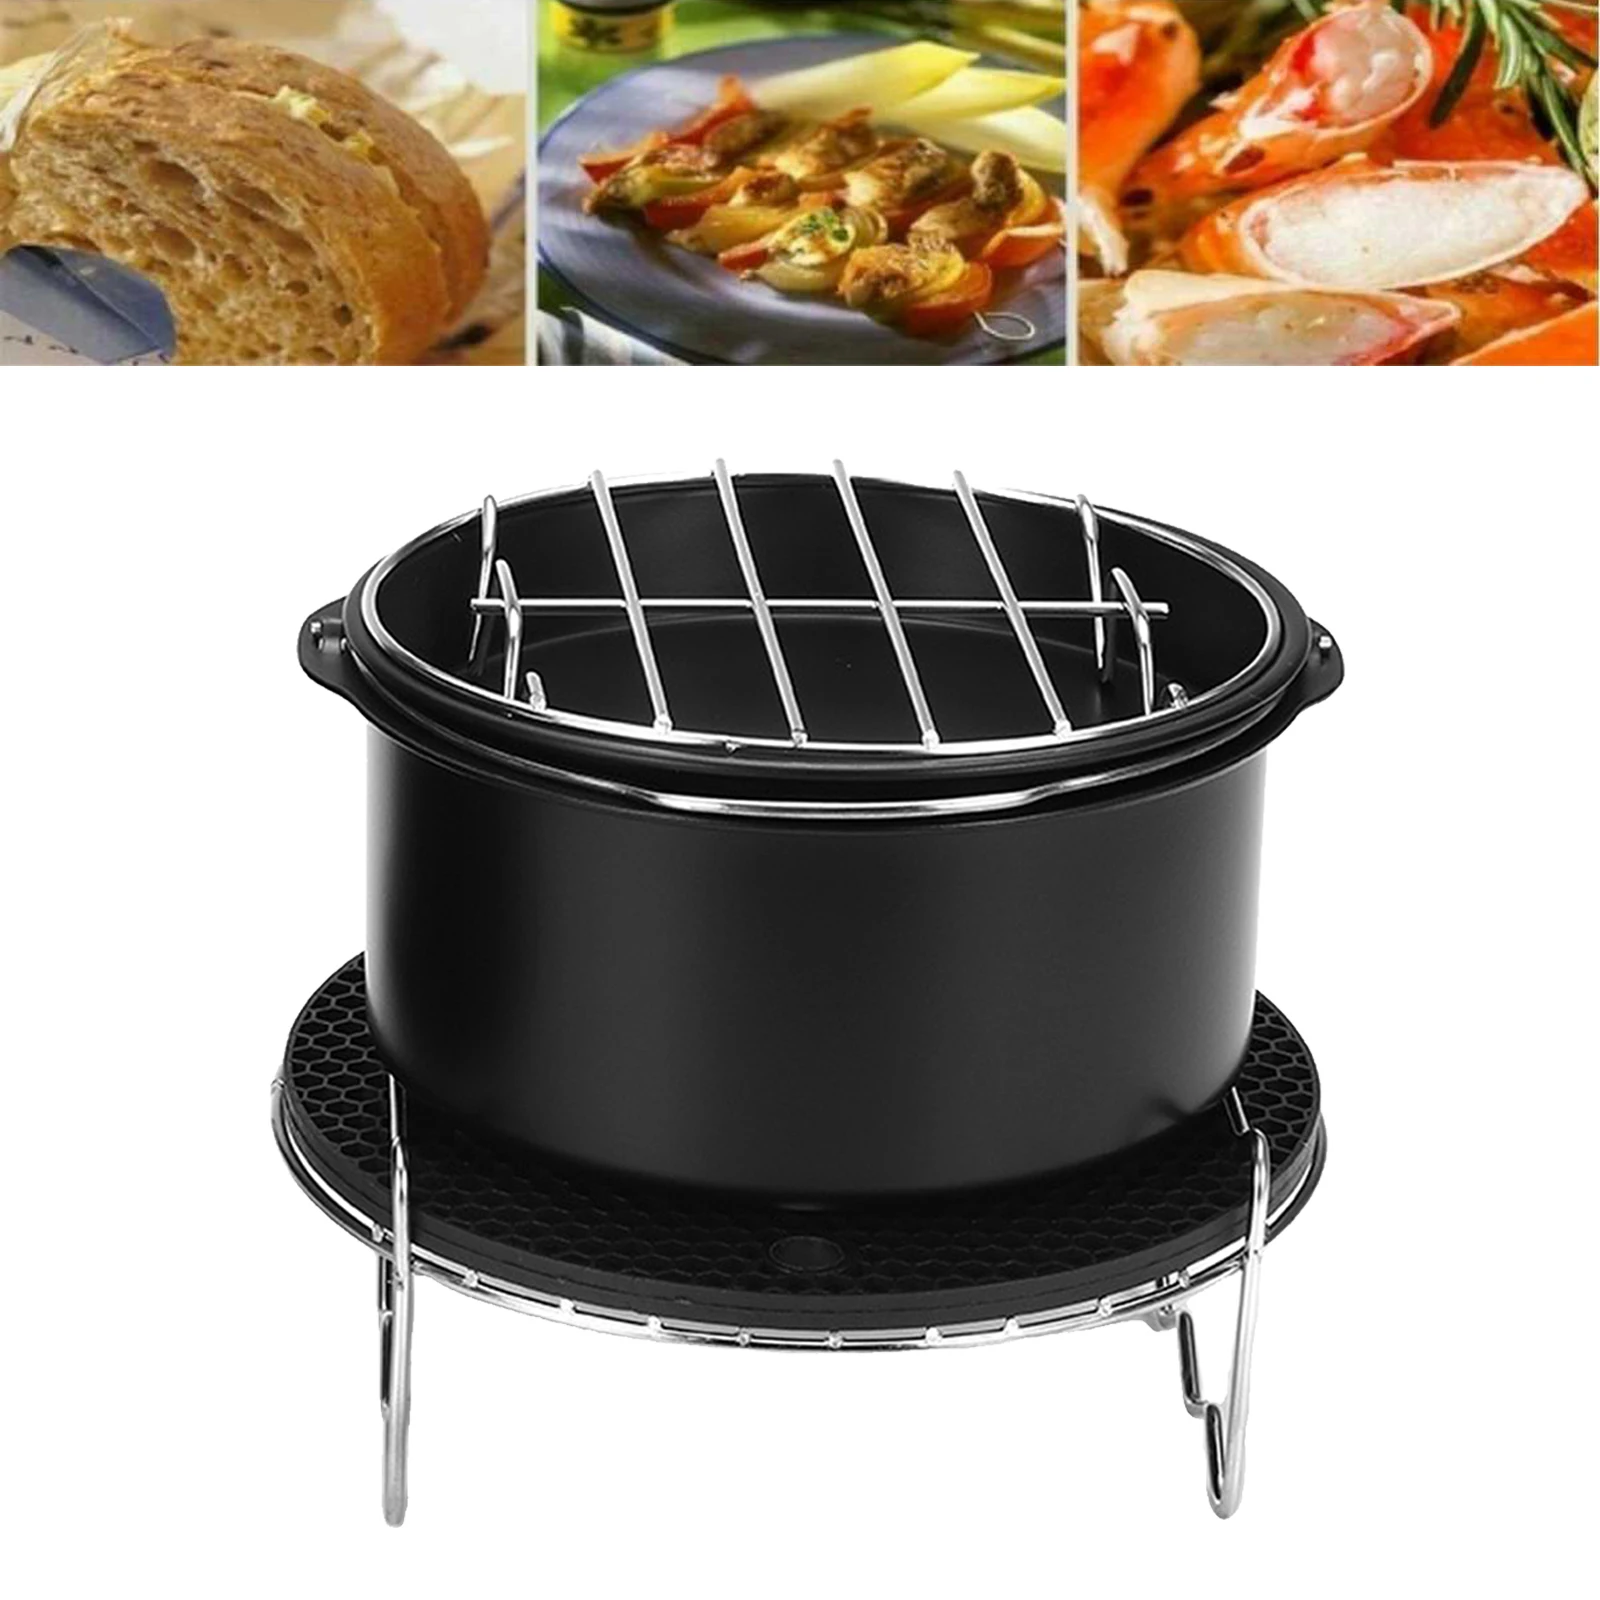 Deep Fryers Universal Air Fryer Accessories Including Cake Barrel,Baking Dish Pan,Grill,Pot Pad Pot Rack with Silicone Mat by Bellagione 10 Pcs 8inch 